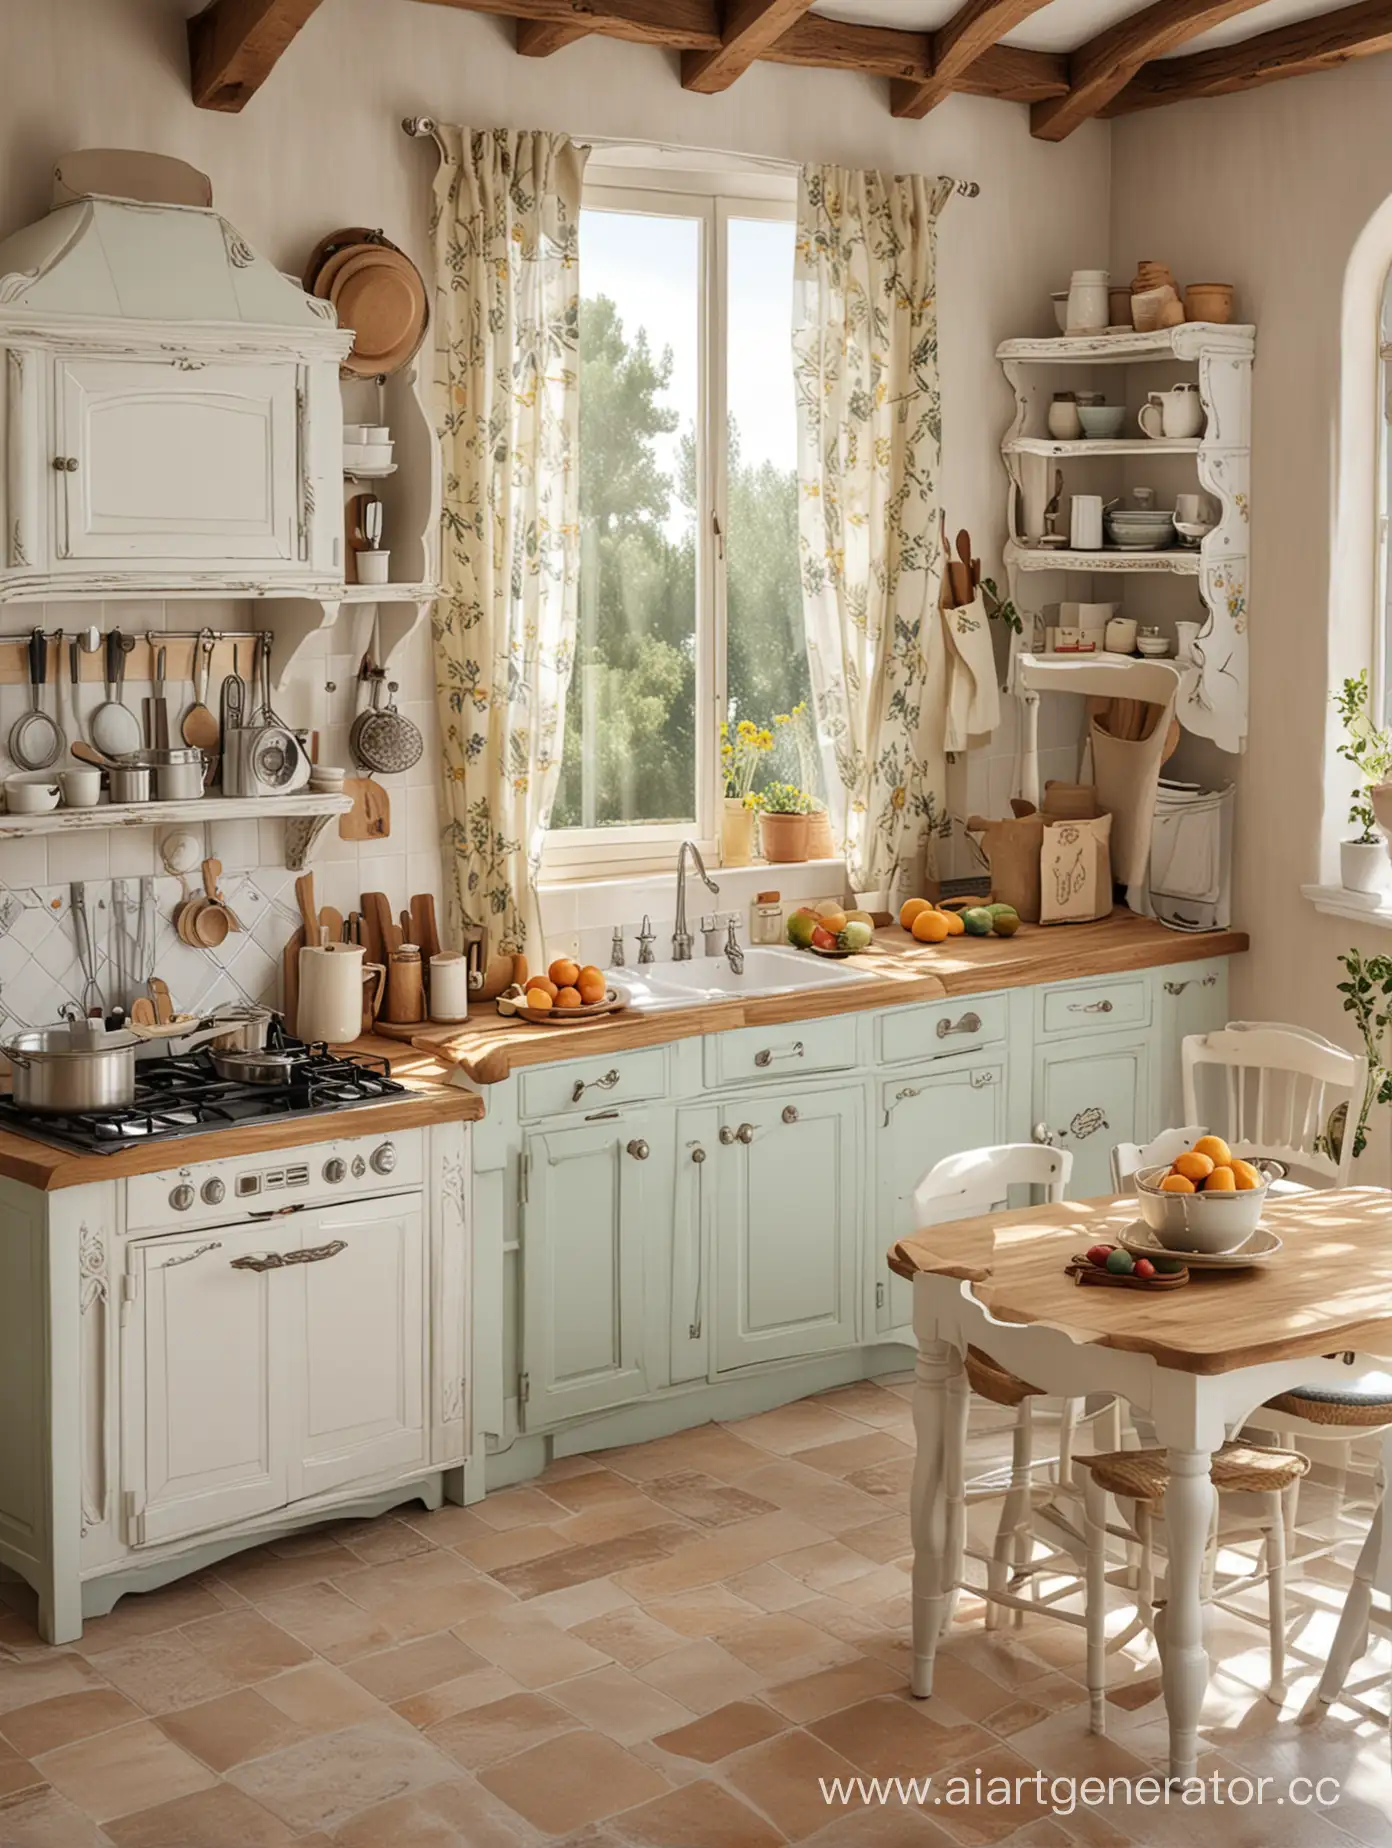 Rustic-Provence-Kitchen-Interior-with-Vintage-Charm-and-Warm-Tones